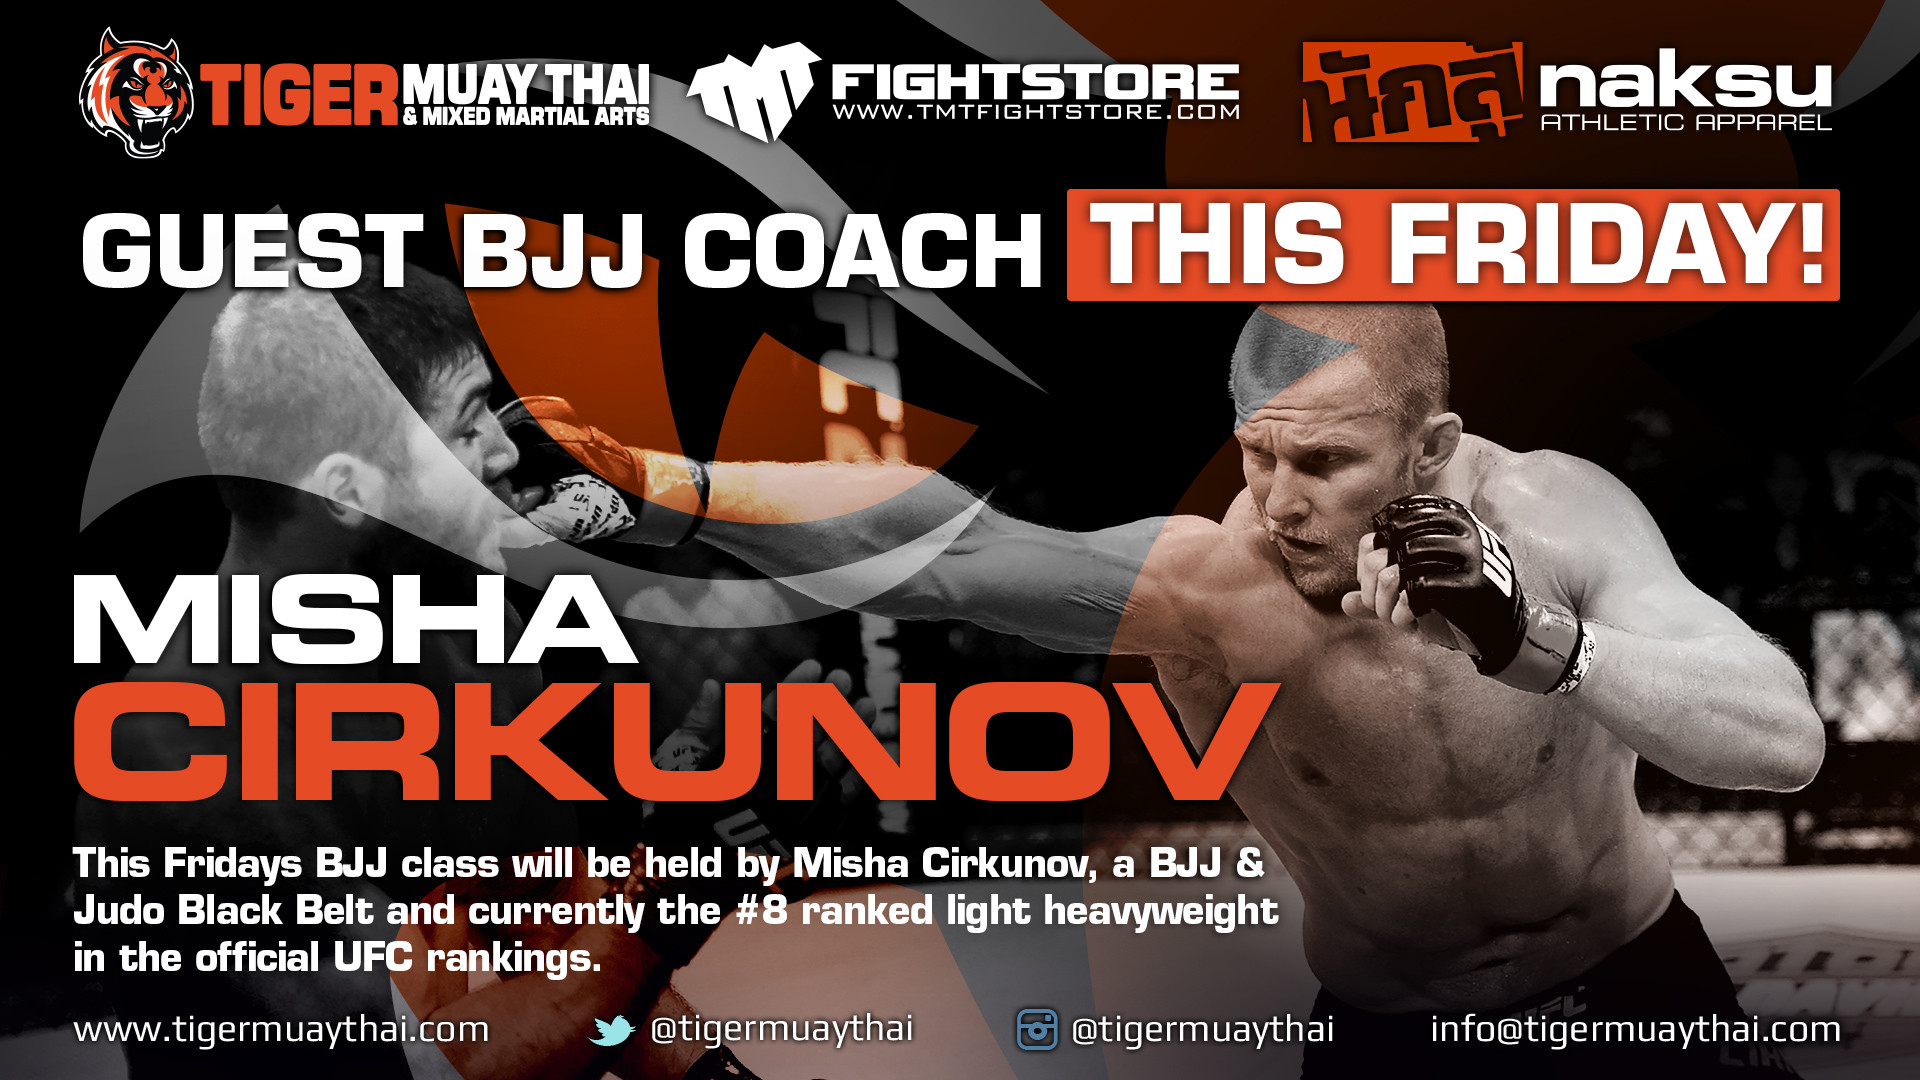 1920x1080 Don't miss this Fridays Guest Coach, currently ranked #8 in the UFC light  heavyweight division Misha Cirkunov!